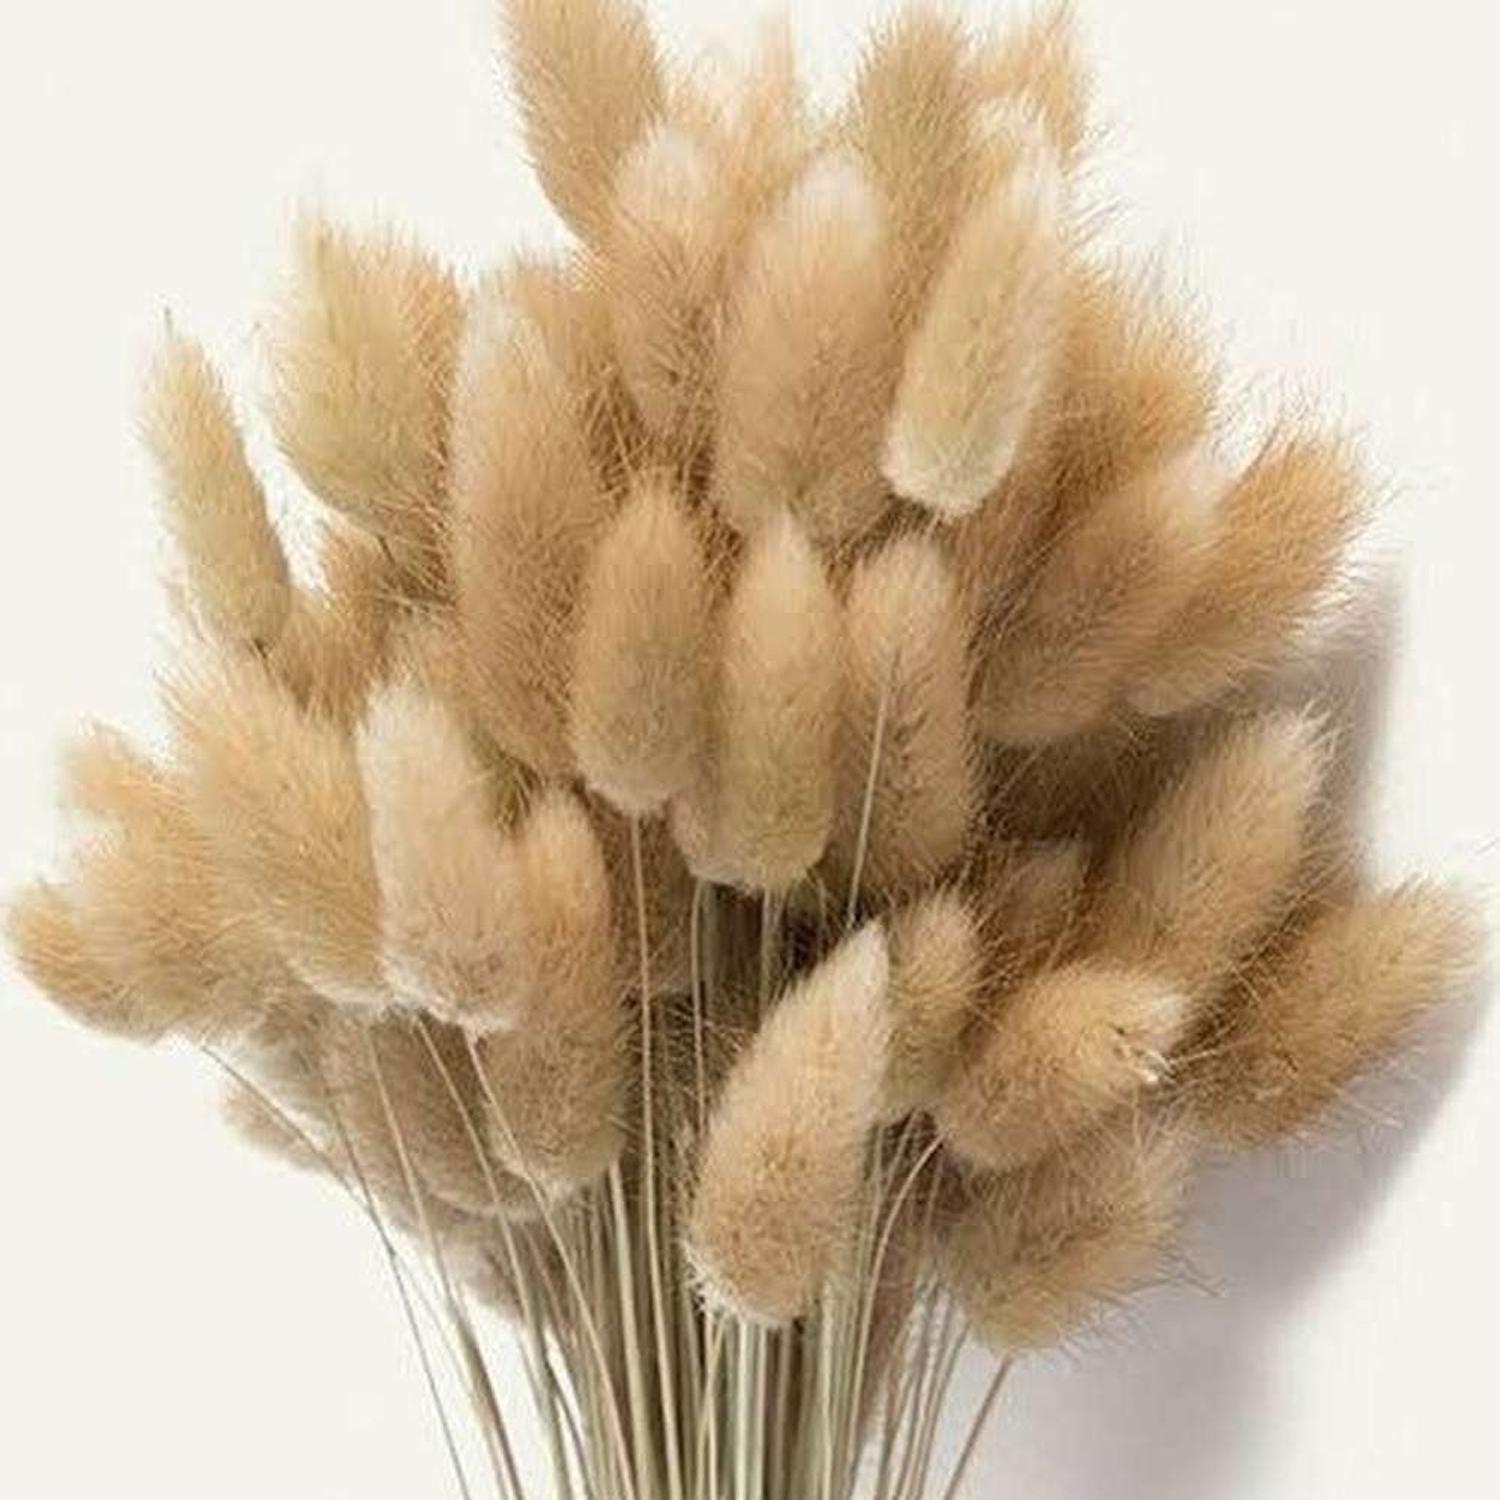 1PC BROWN BUNNY TAIL GRASS